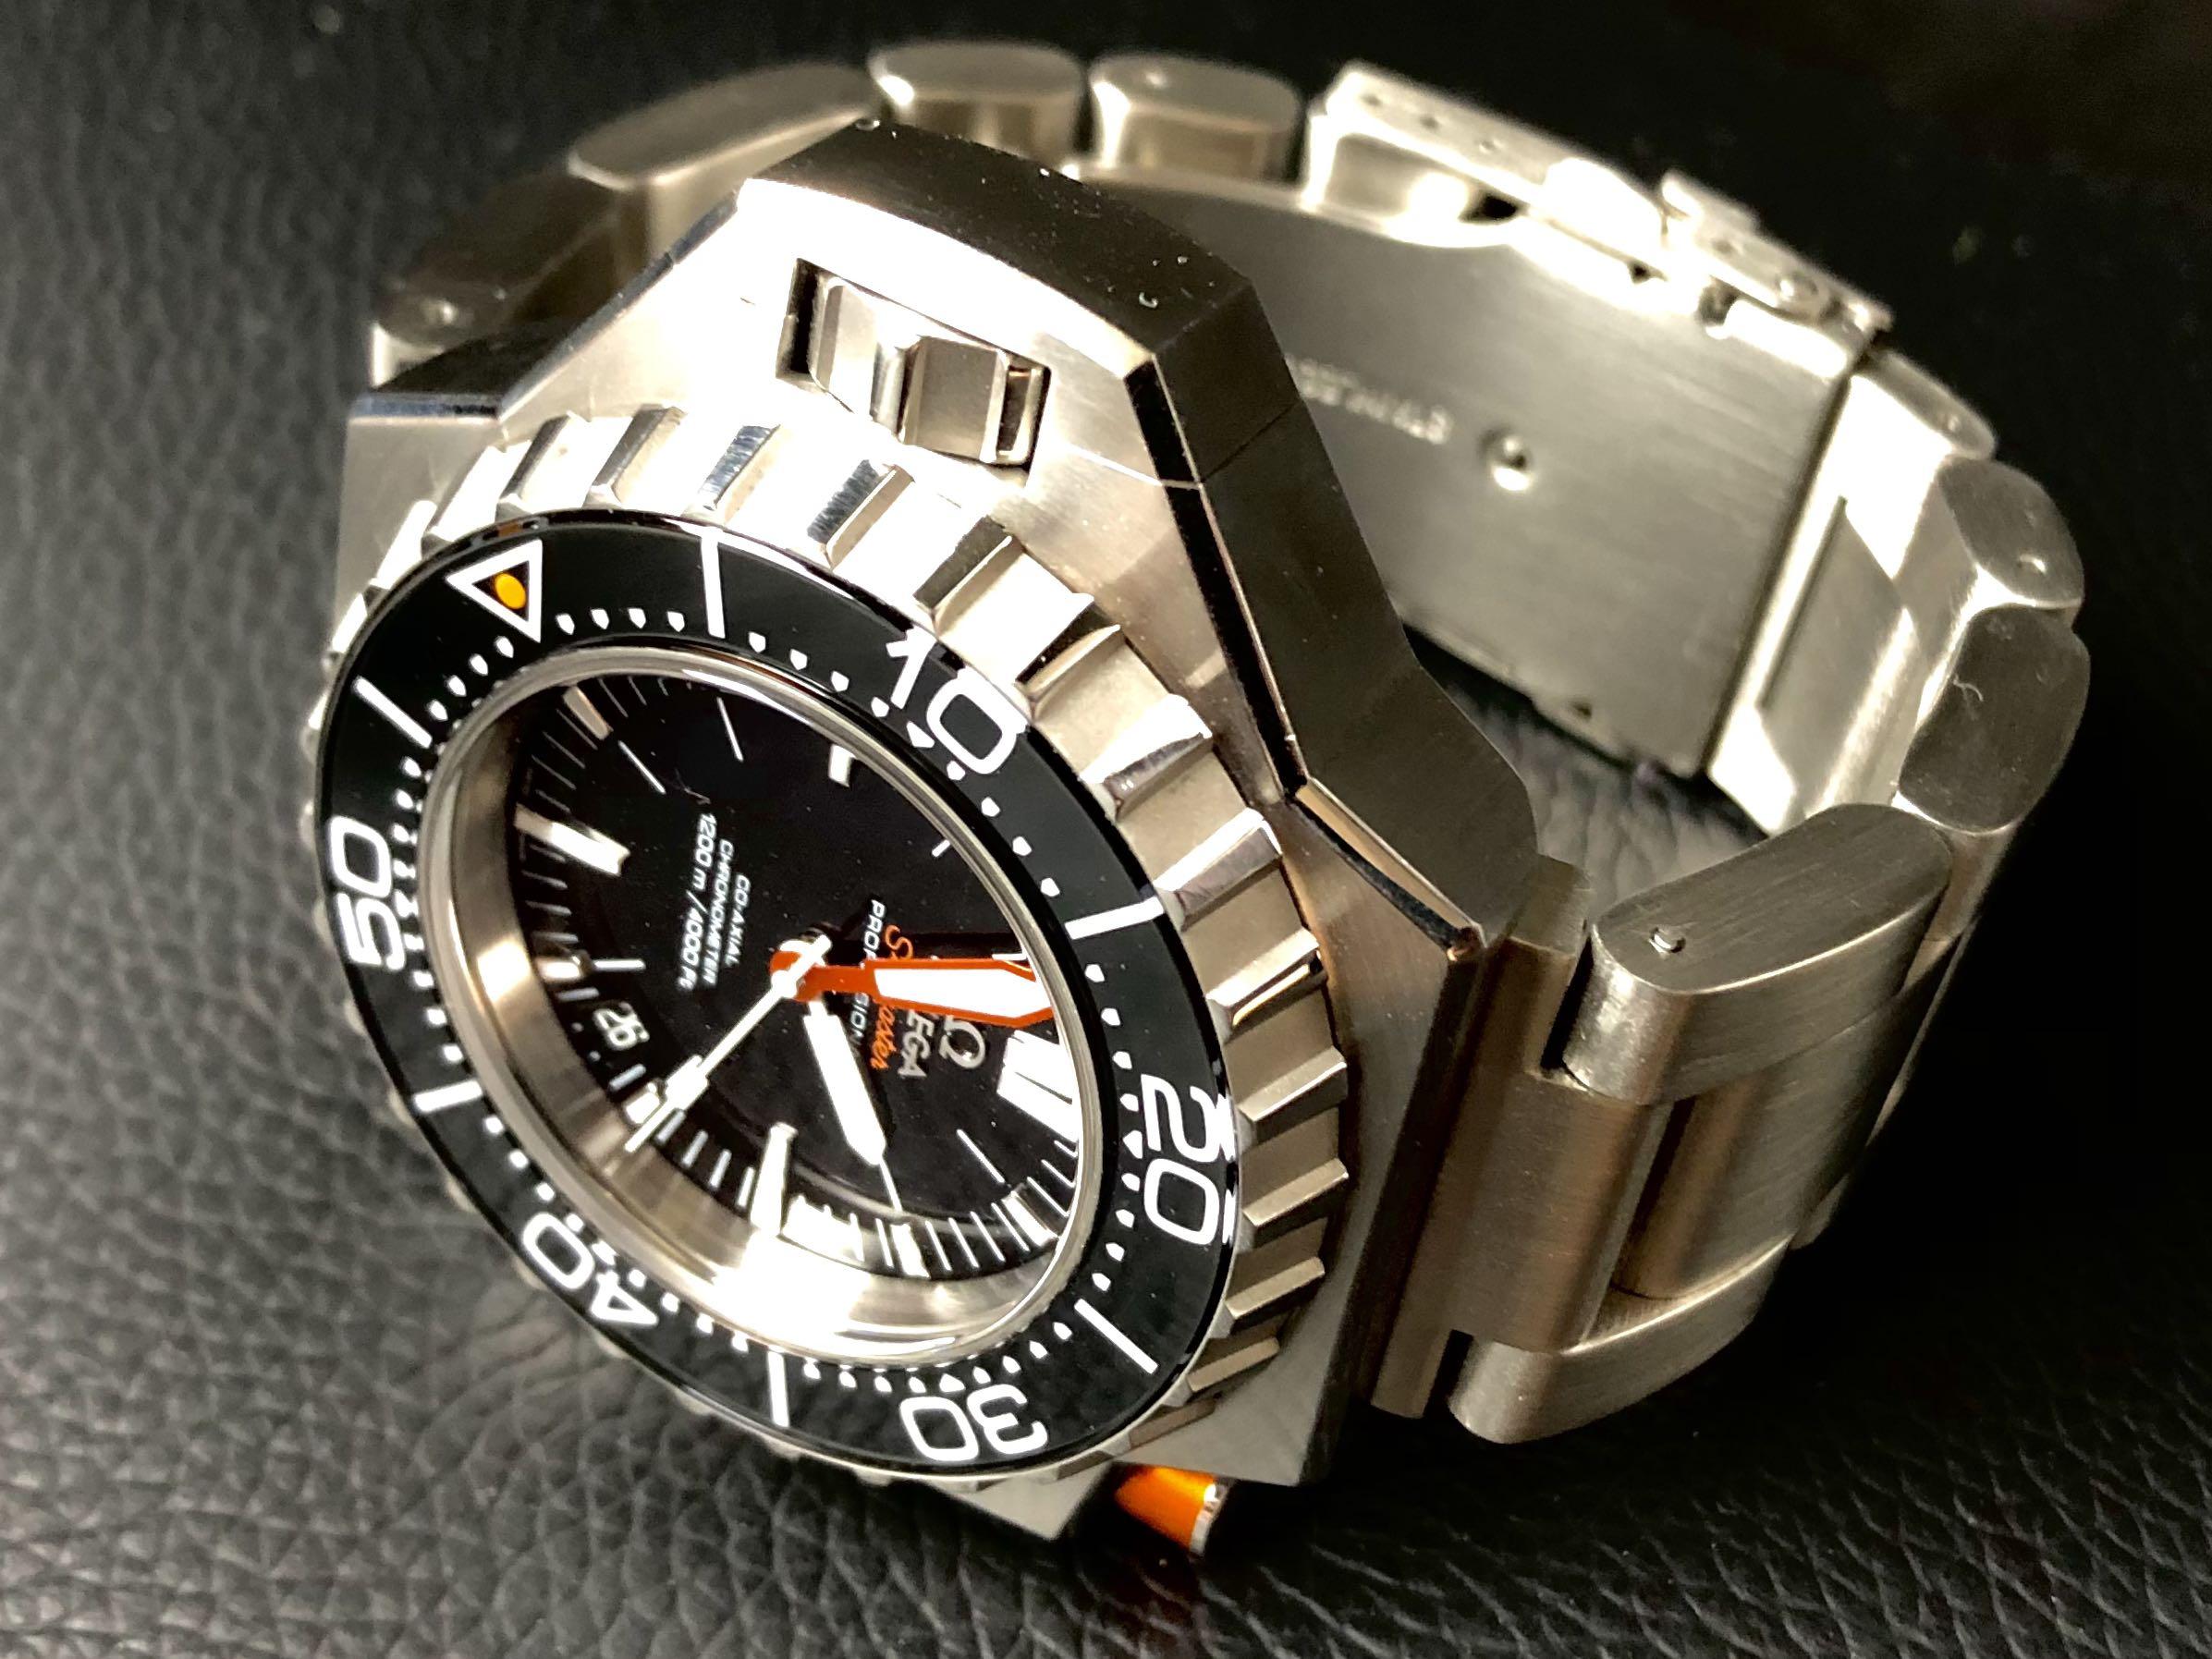 Omega Ploprof Seamaster 1200m dive diver watch fat oyster bracelet also fit  Helson Sharkmaster Ocean7 Ocean 7 LM-7 Professional 24mm bracelet strap,  Men's Fashion, Watches & Accessories, Watches on Carousell